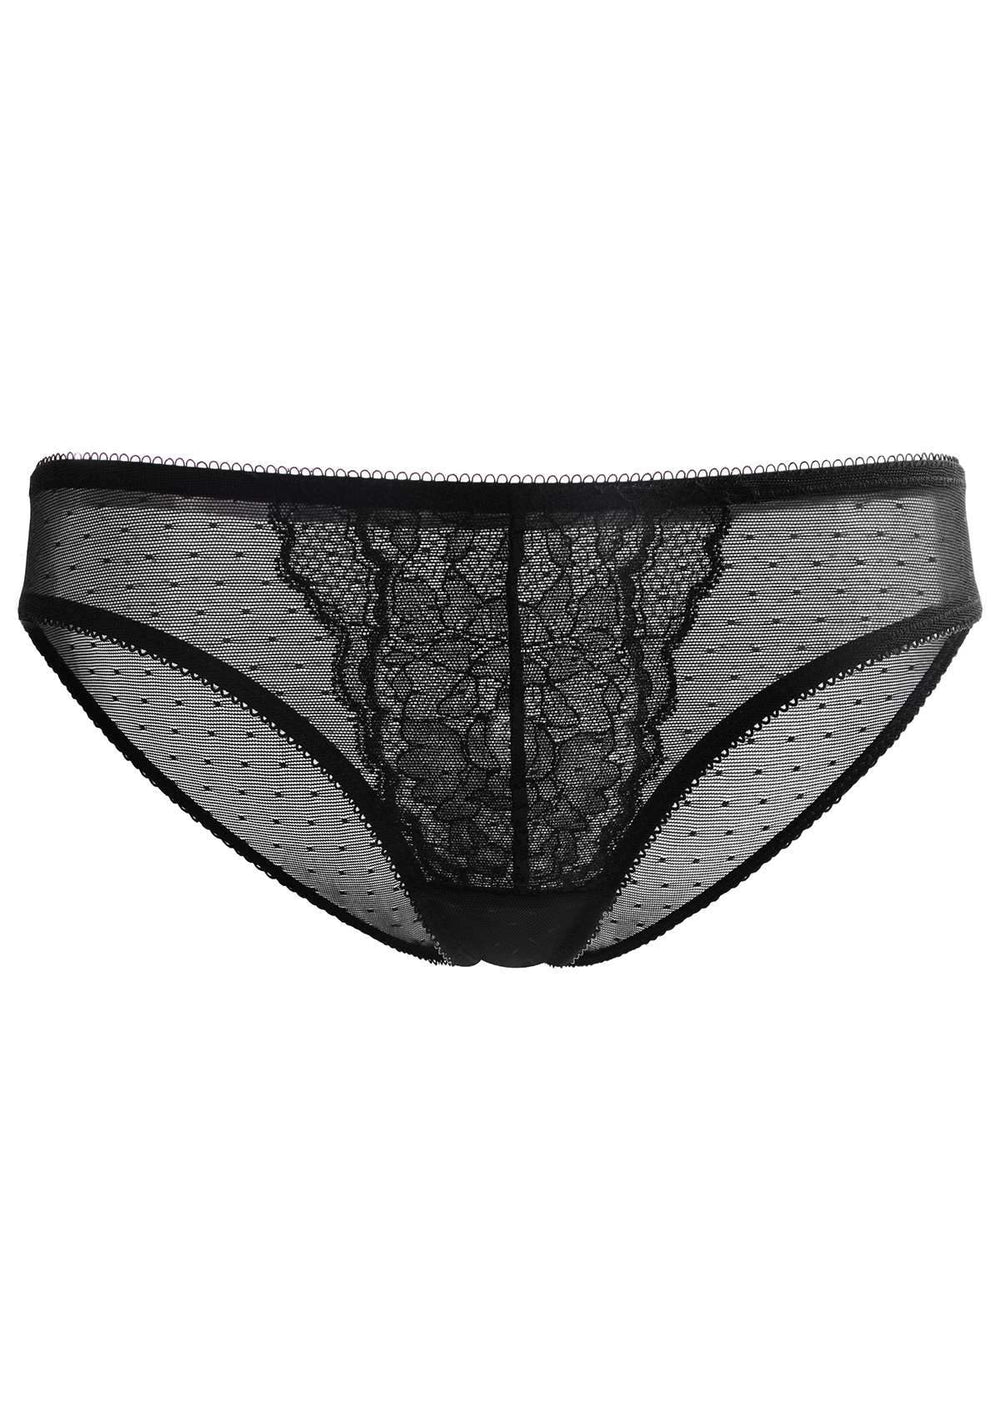 HSIA Mid-Rise Delicate Lace Sheer Underwear, Breathable and Comfortable